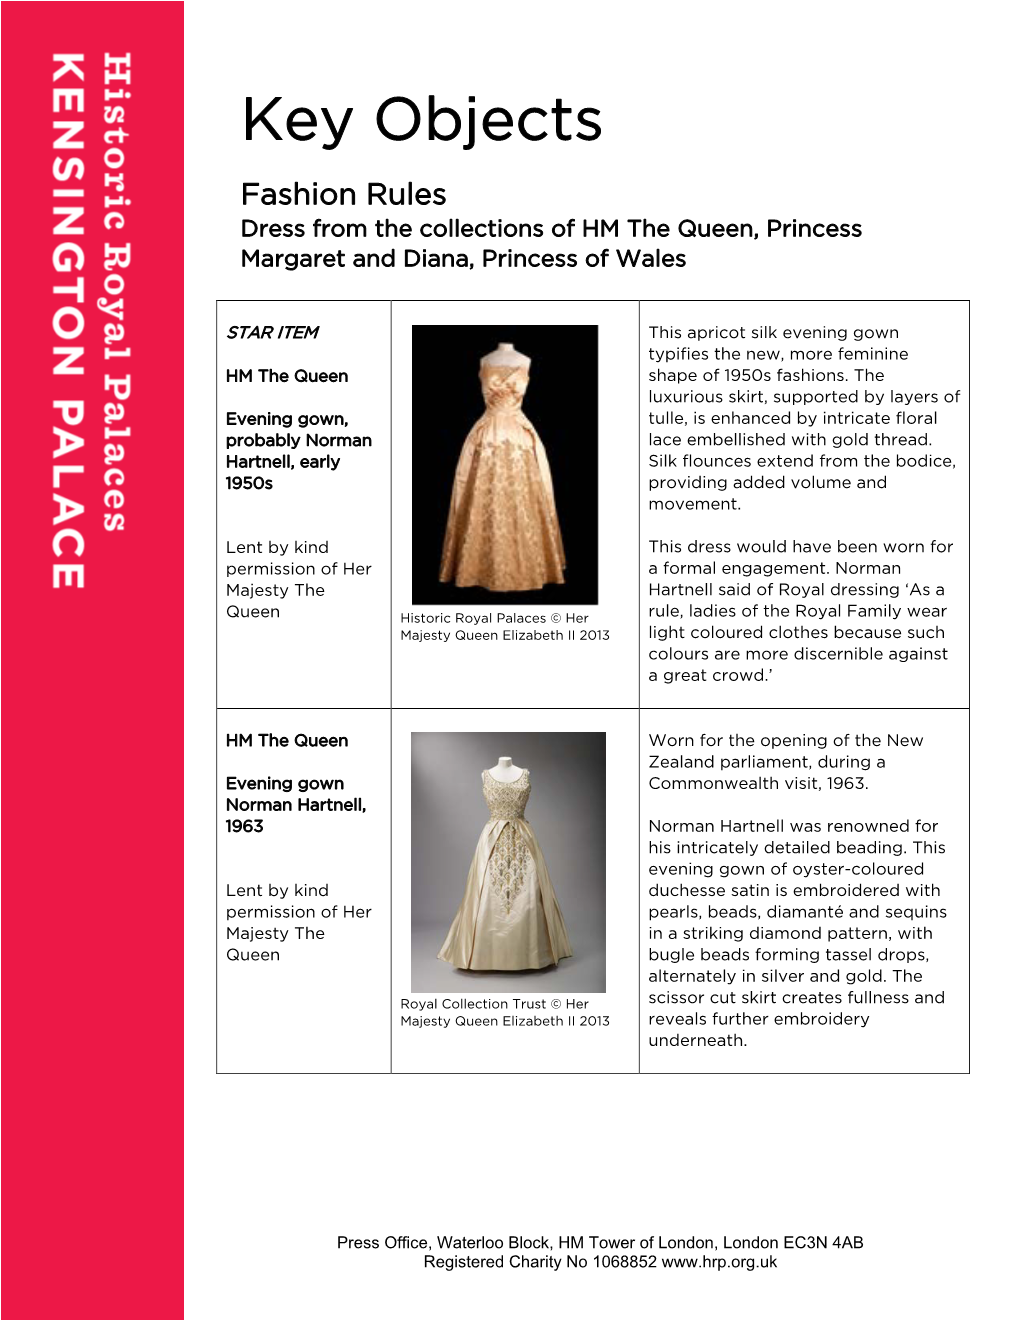 Key Objects Fashion Rules Dress from the Collections of HM the Queen, Princess Margaret and Diana, Princess of Wales